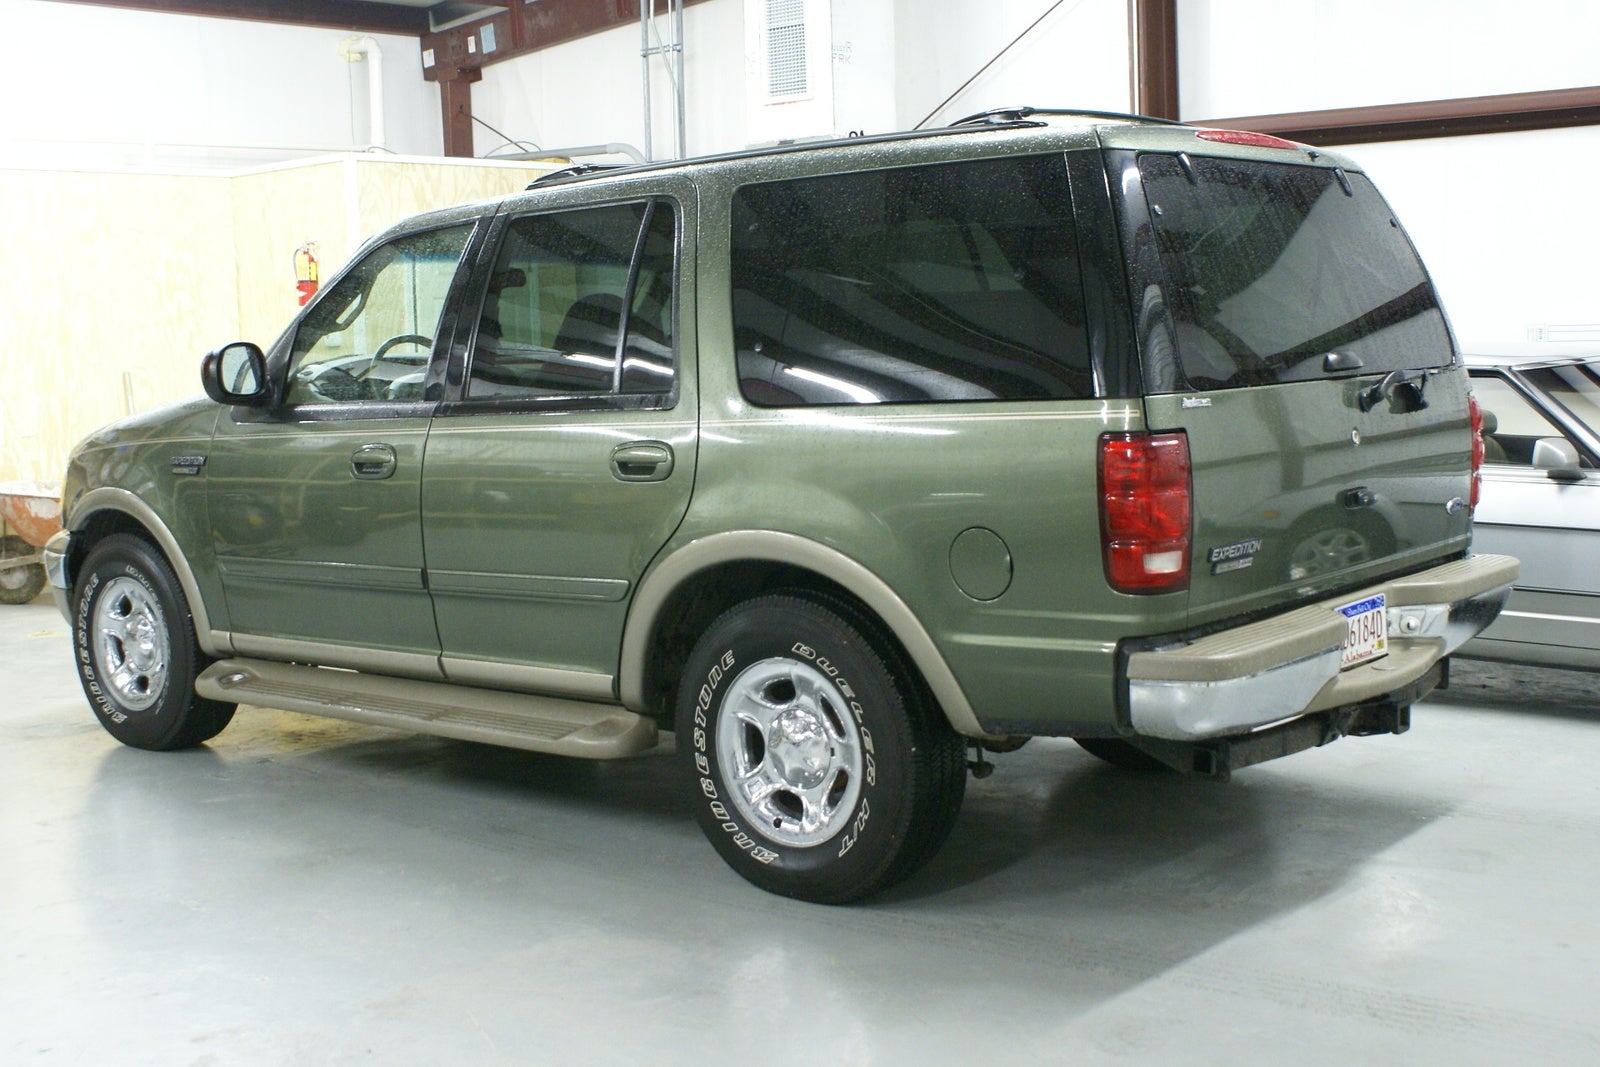 2001 Ford expedition stock rims #6